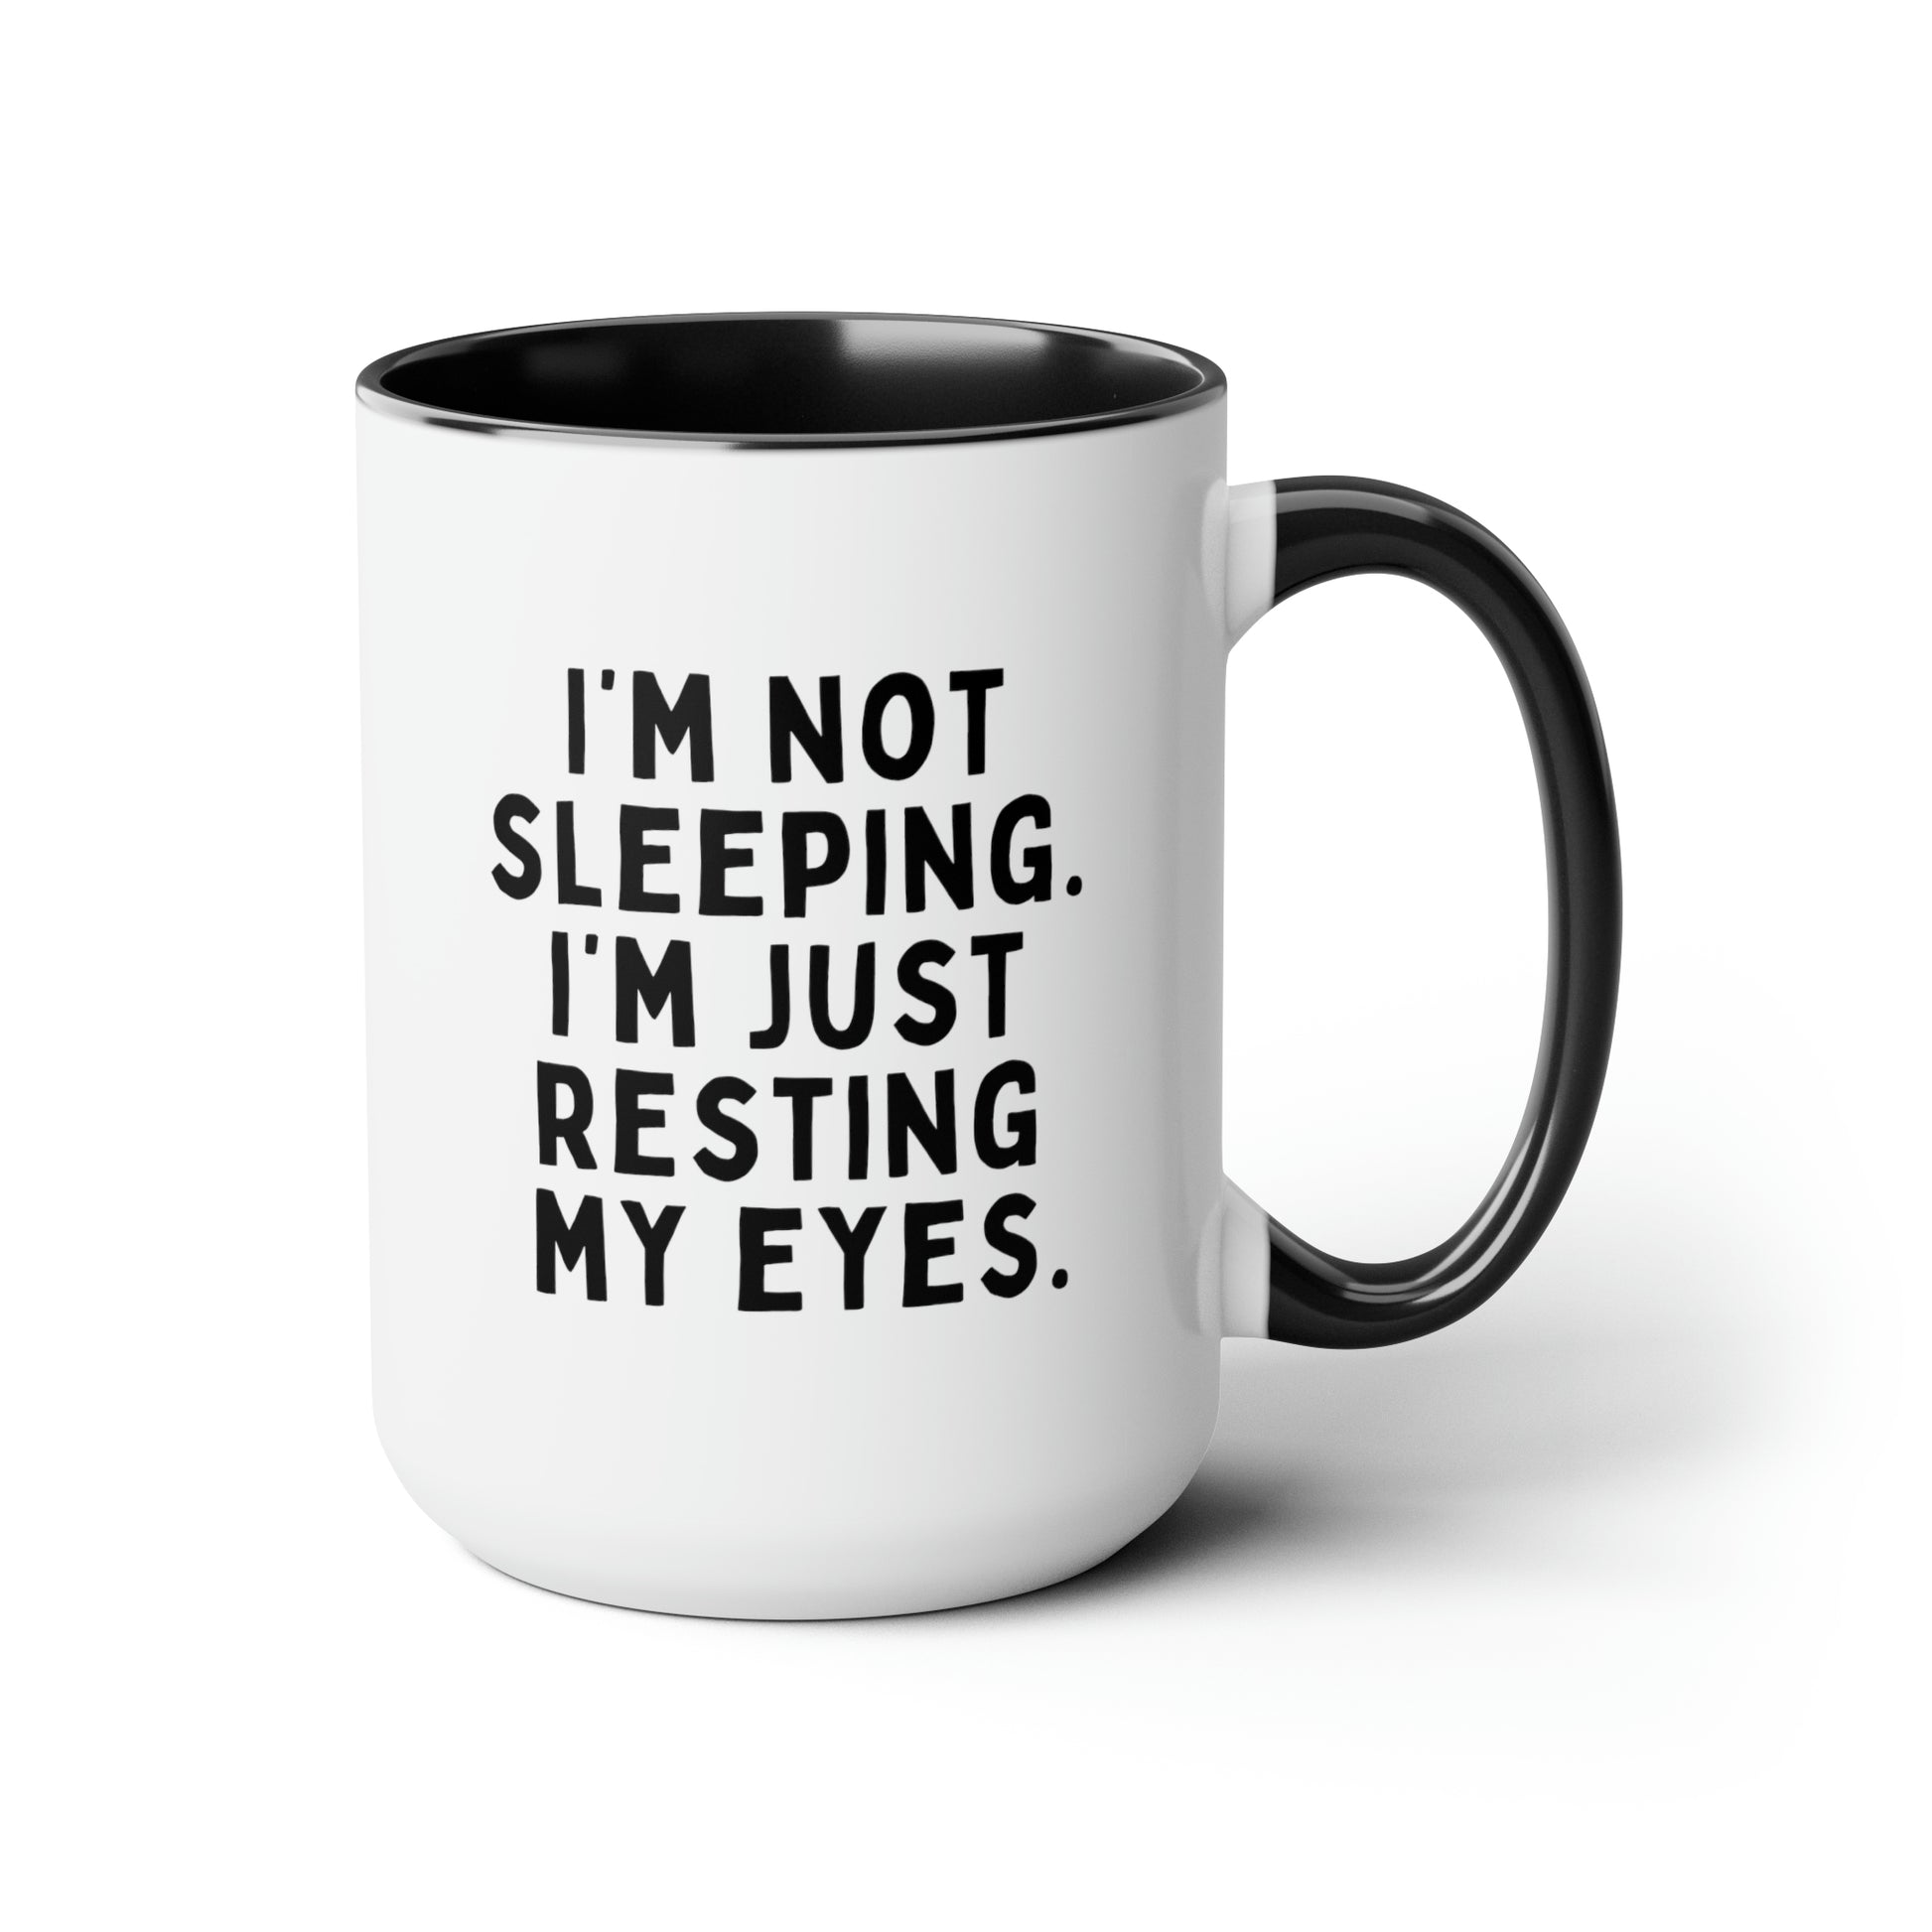 I'm Not Sleeping. I'm Just Resting My Eyes. 15oz white with black accent funny large coffee mug gift for dad fathers day daddy husband grandpa cup him waveywares wavey wares wavywares wavy wares